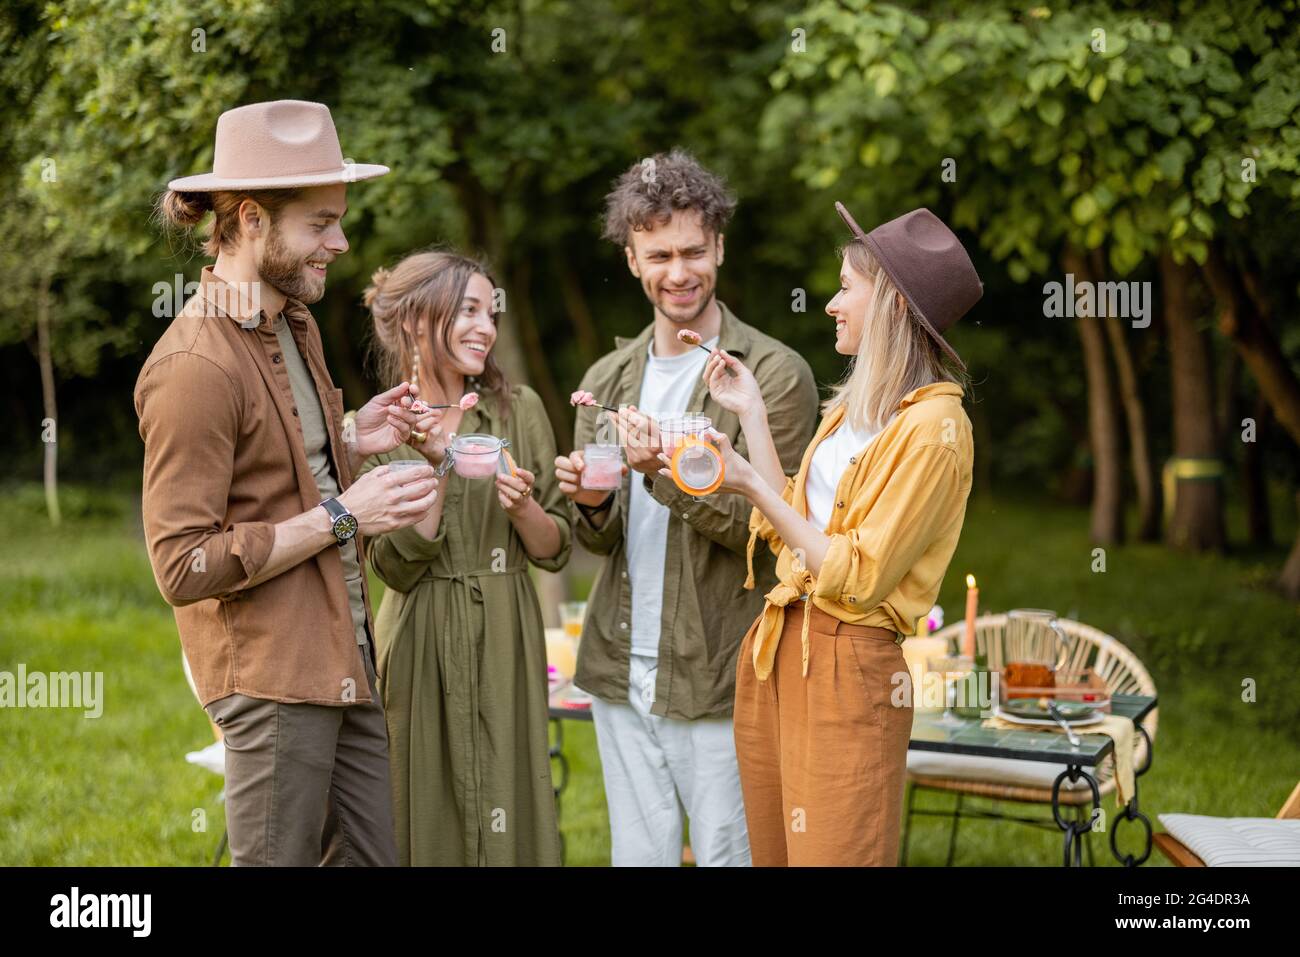 Friends with ice cream gathering outdooors Stock Photo